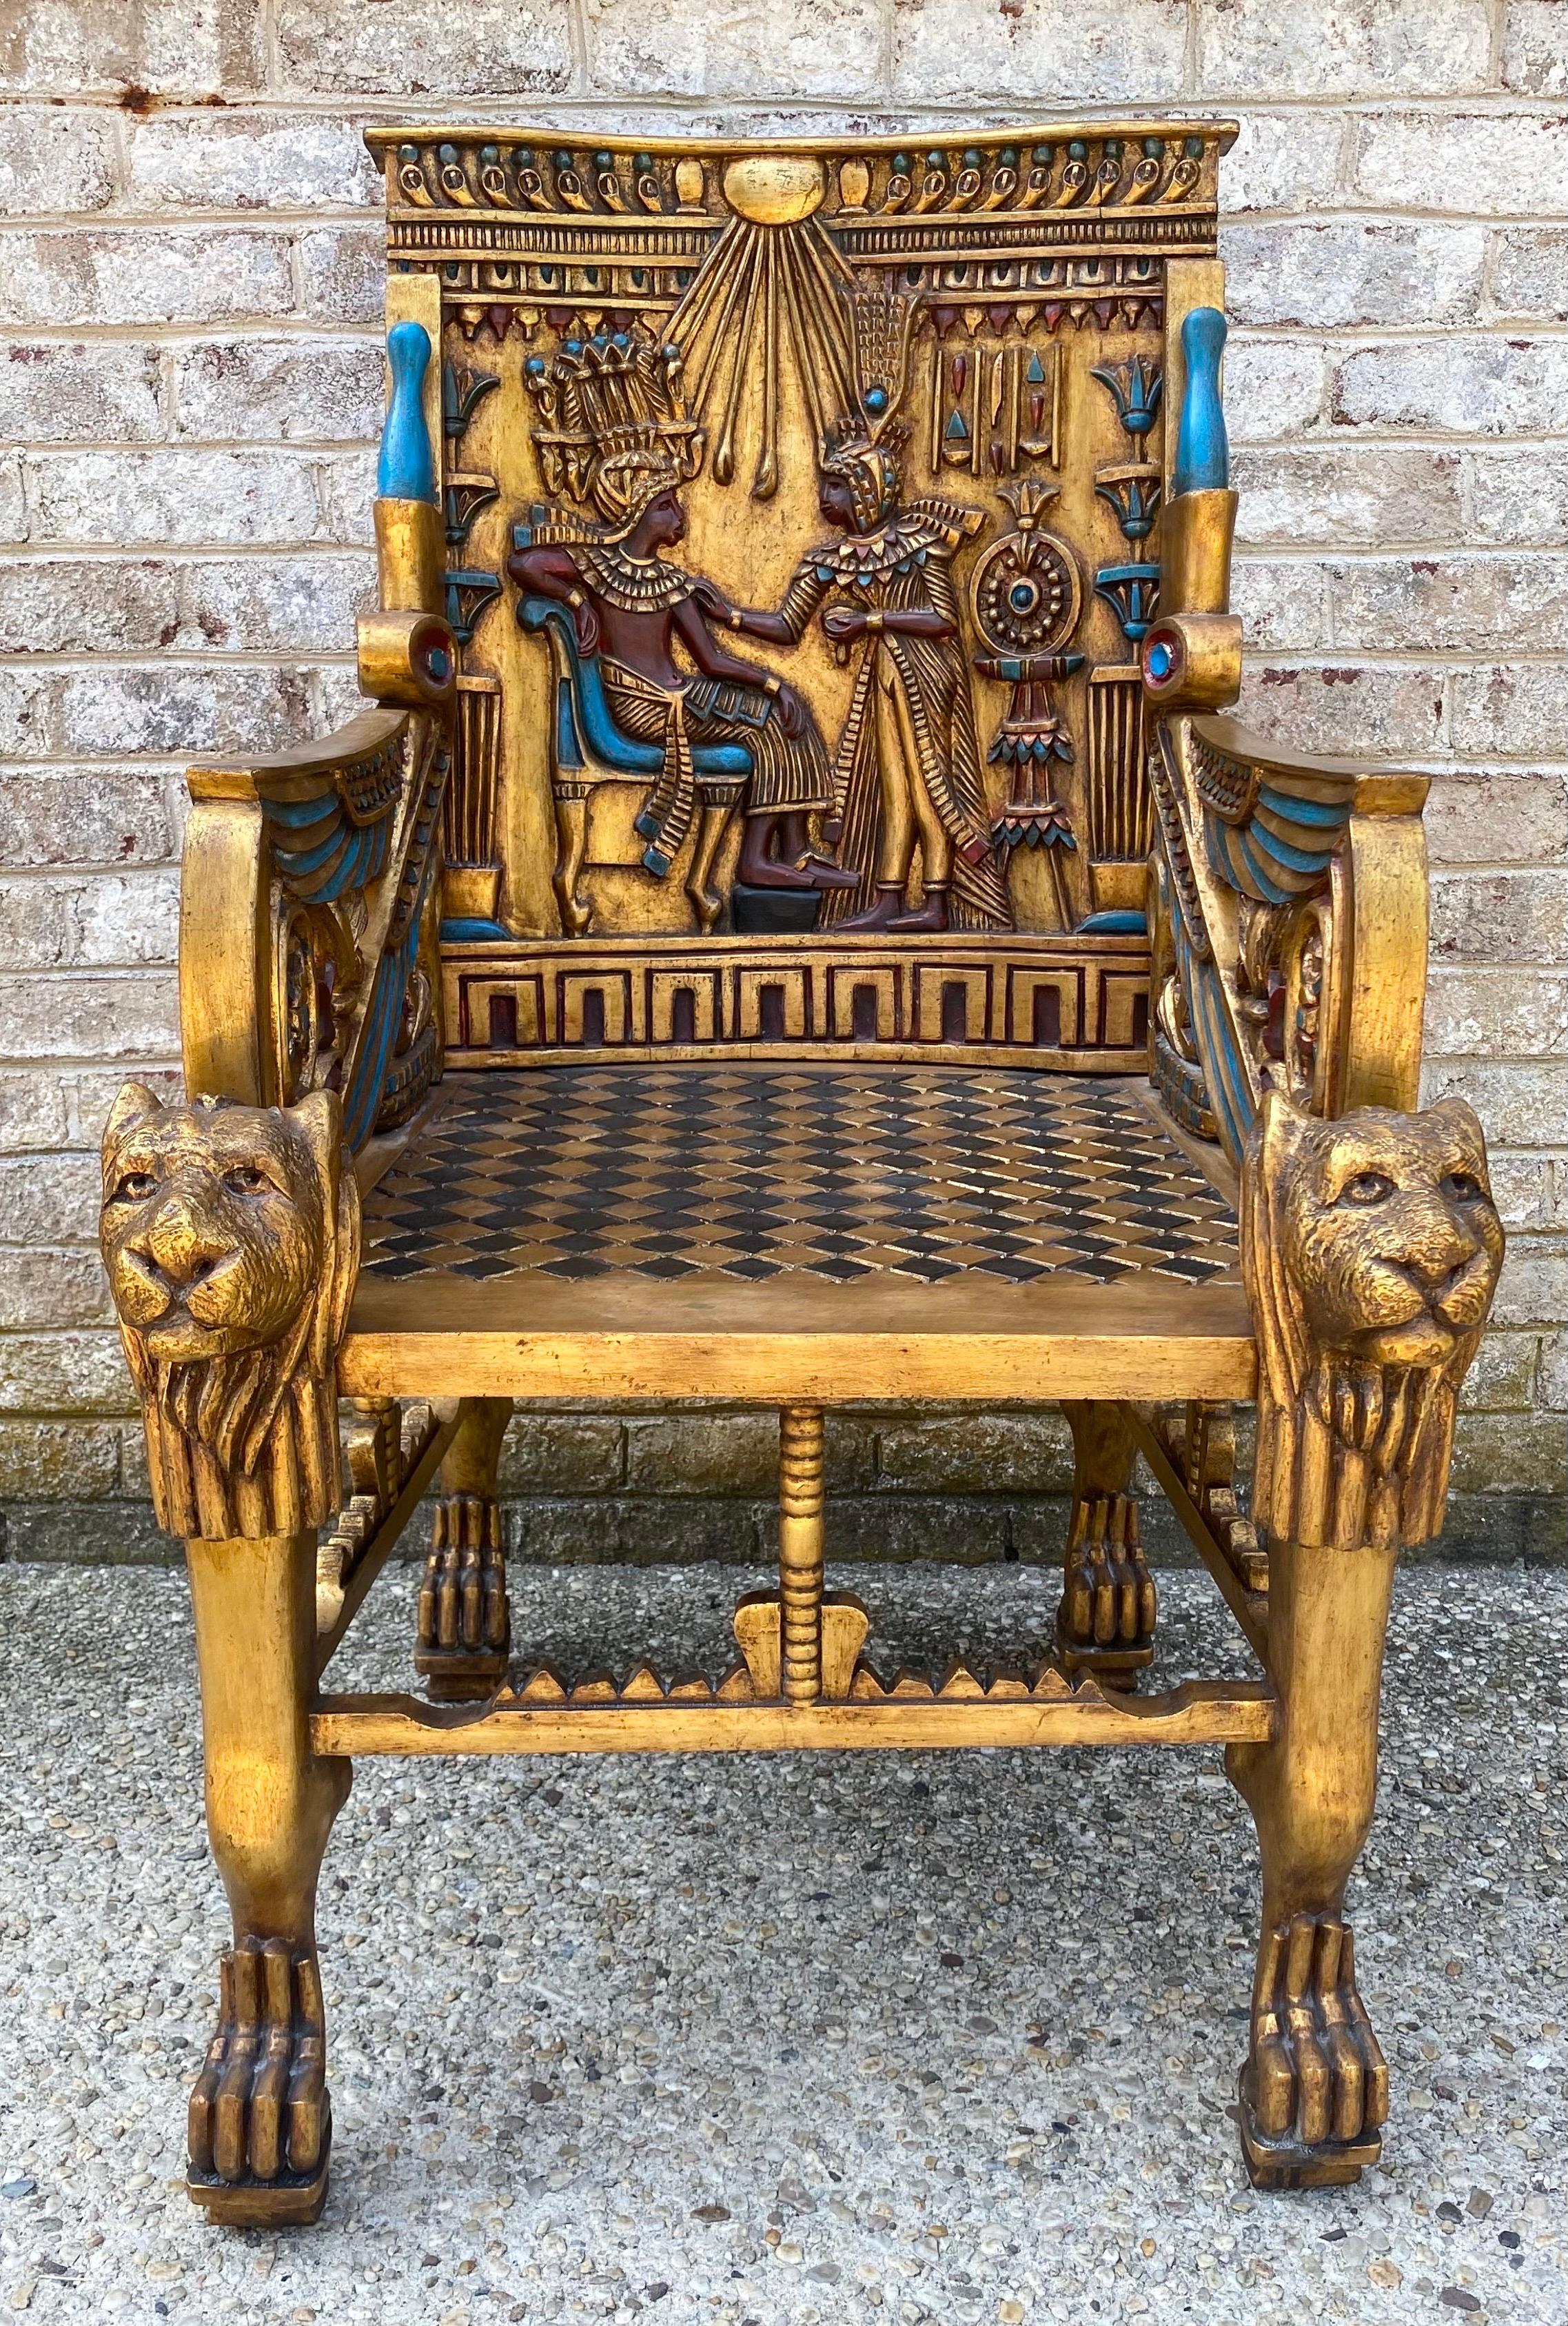 Fabulous Egyptian revival style carved, gilt, and painted throne-like chair.